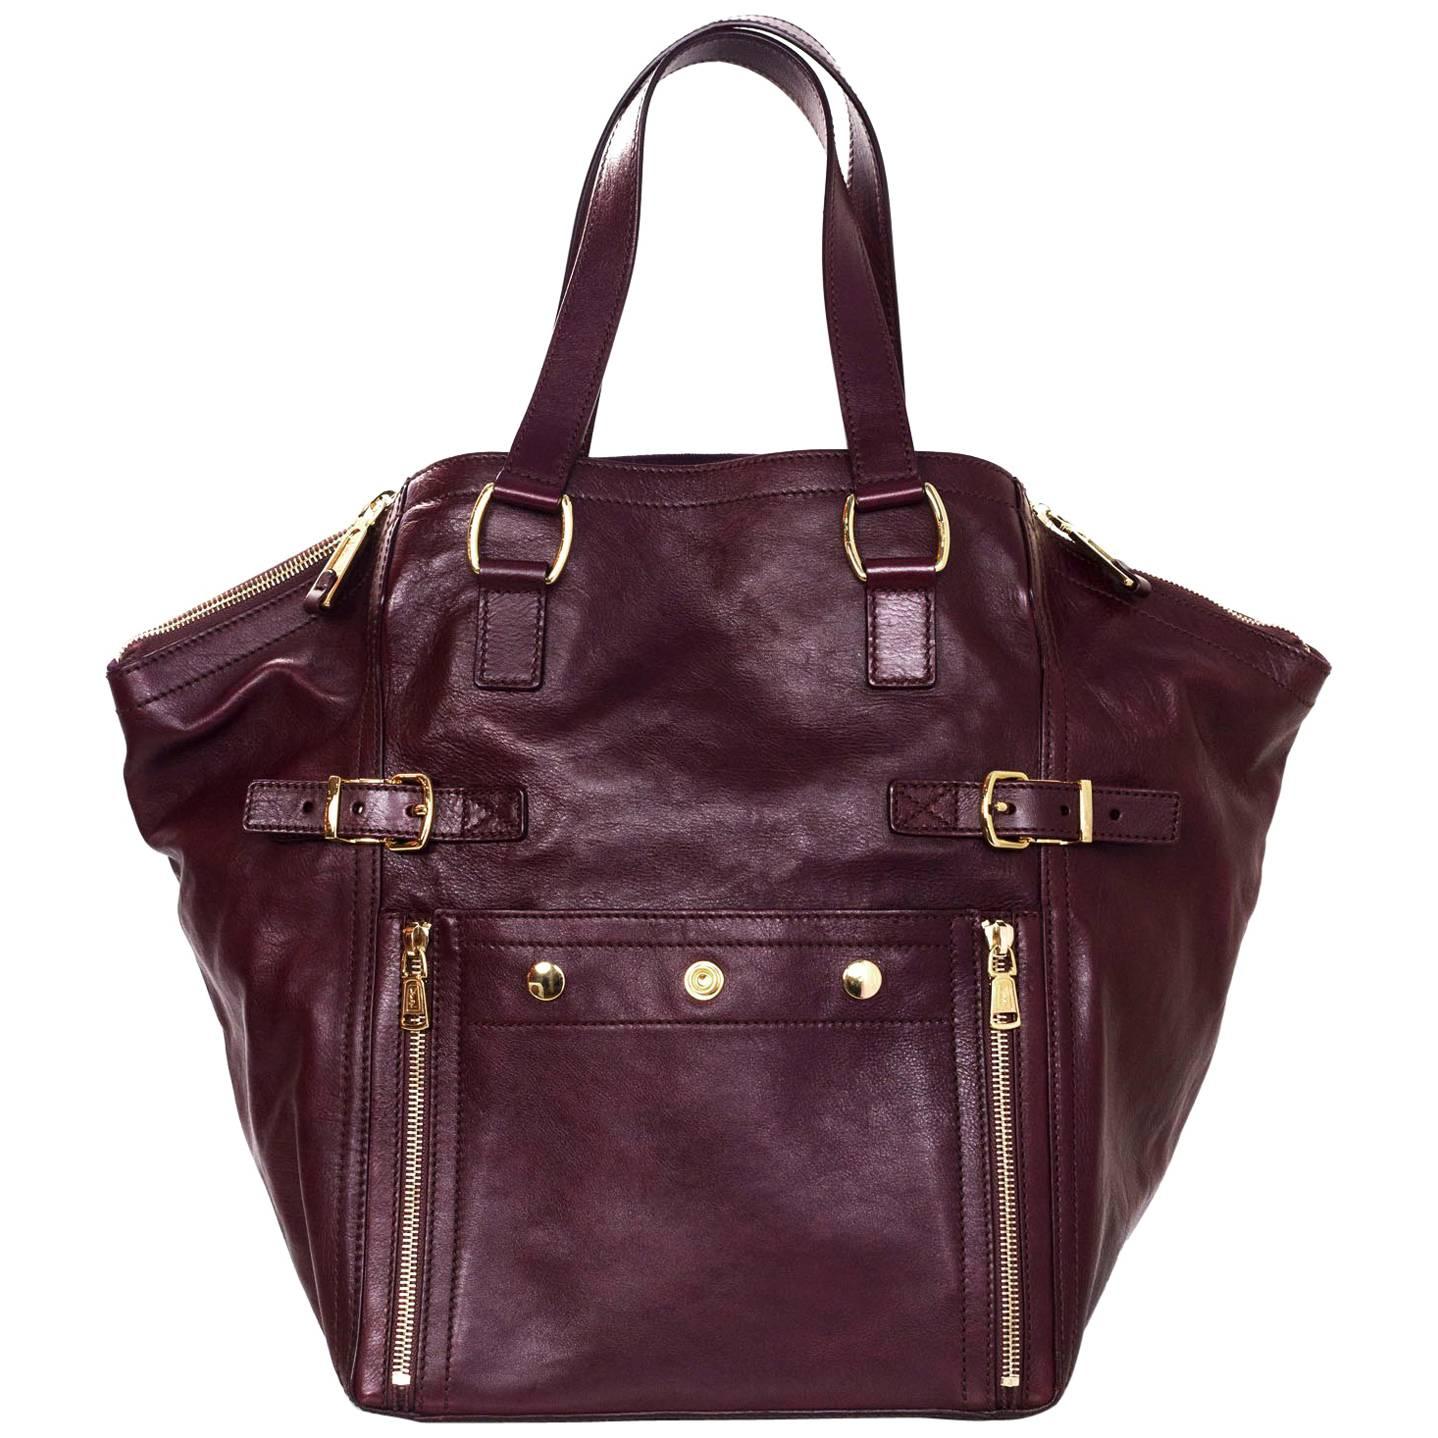 Yves Saint Laurent Burgundy Leather Large Downtown Tote Bag